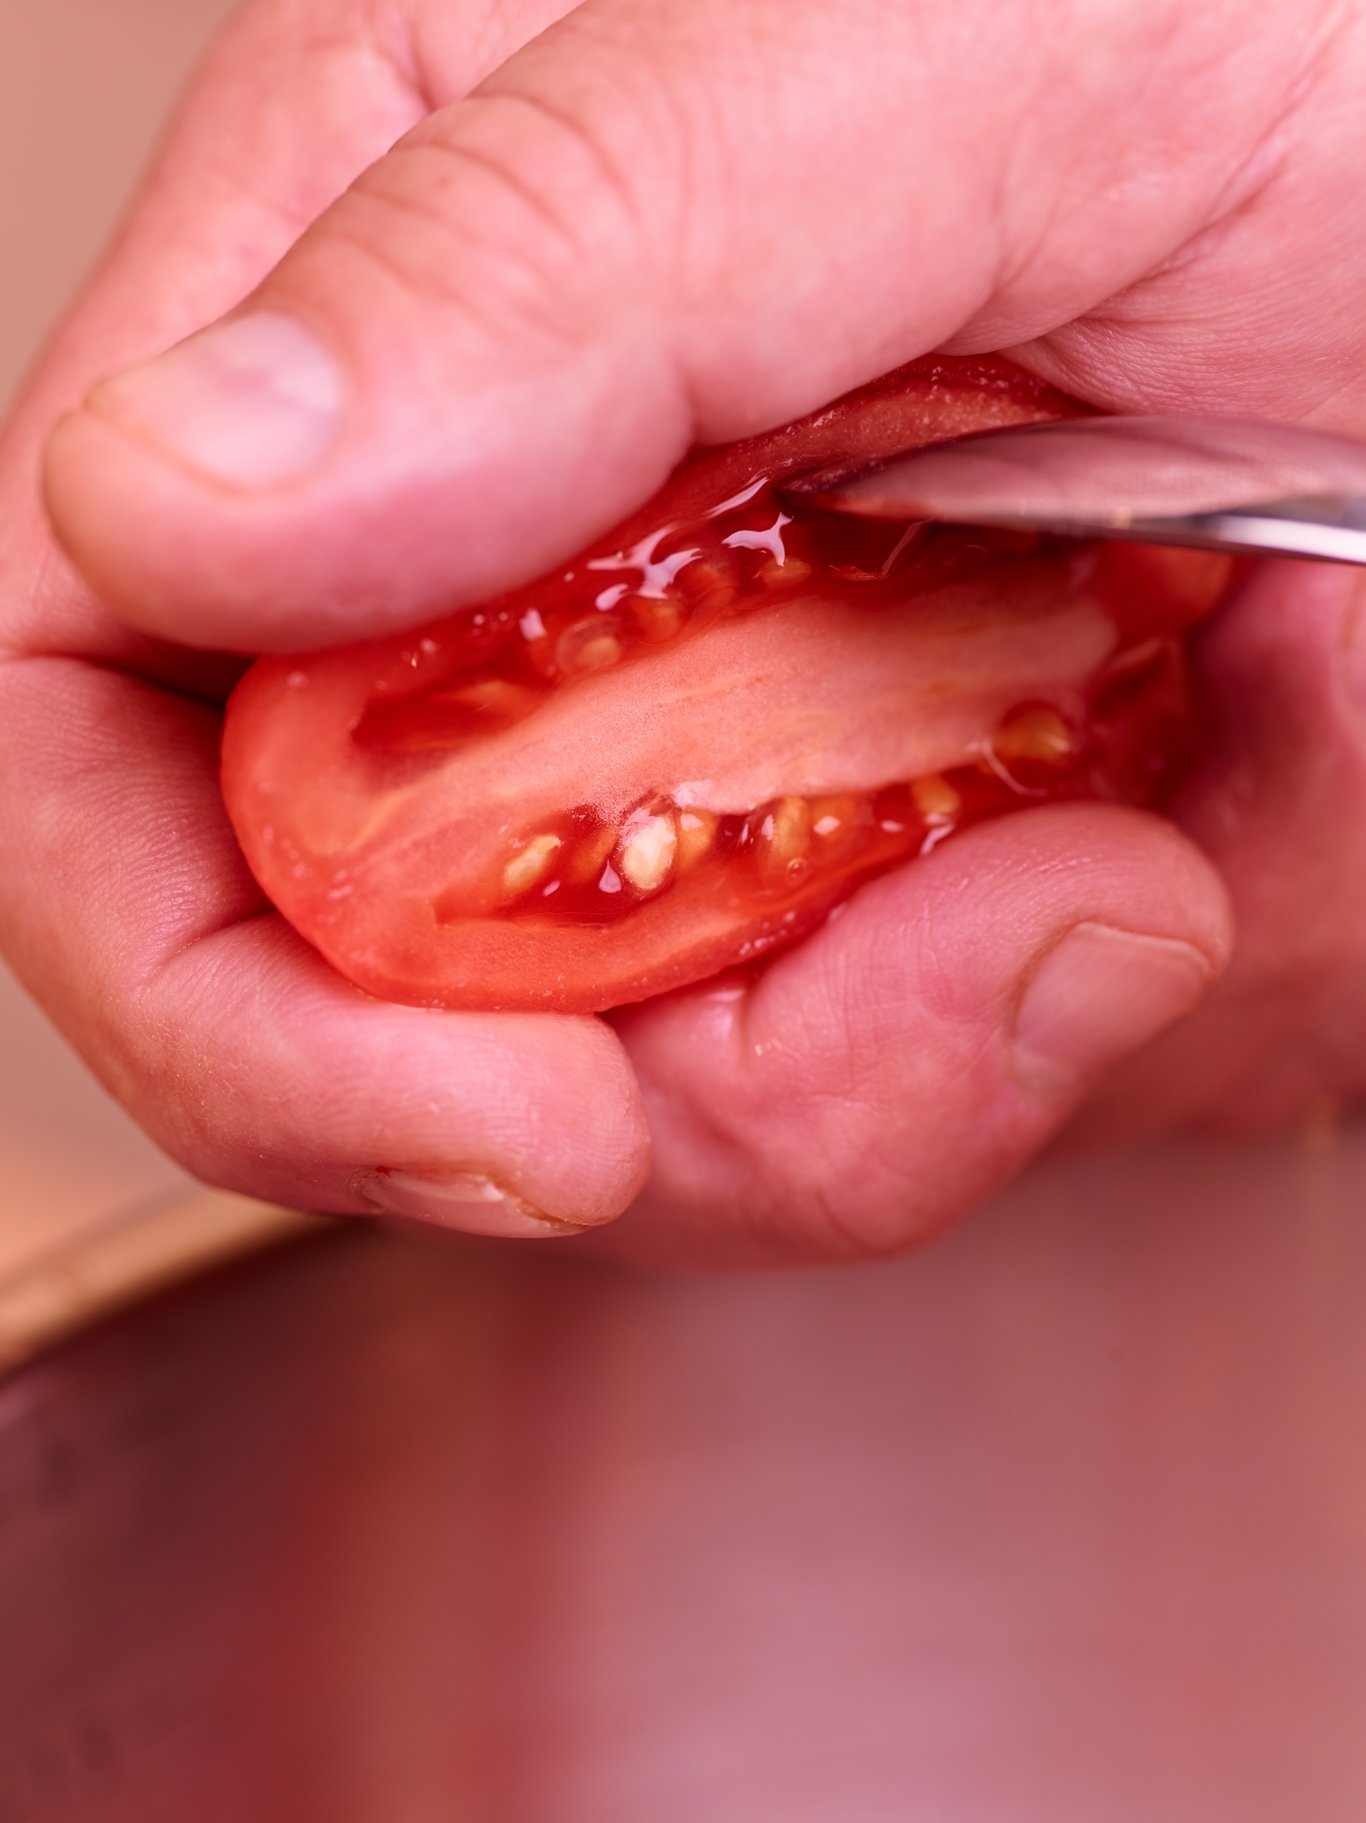 Squeeze the seeds from the tomato.